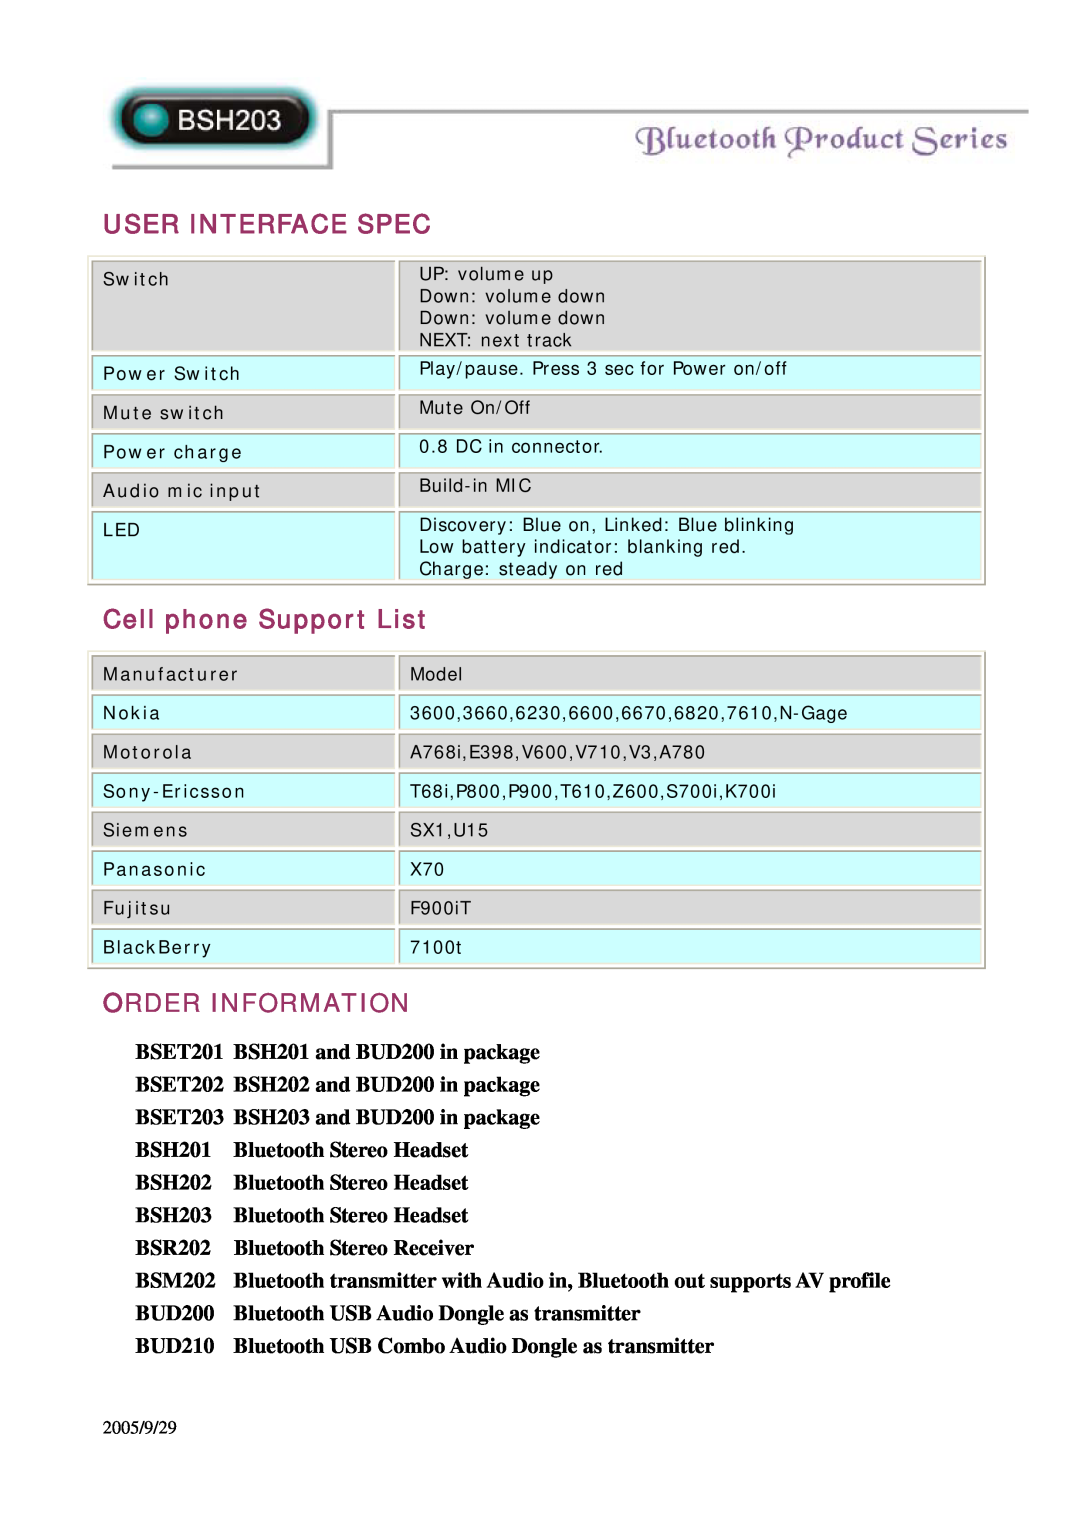 Abocom BSH203 specifications User Interface Spec, Cell phone Support List, Order Information 